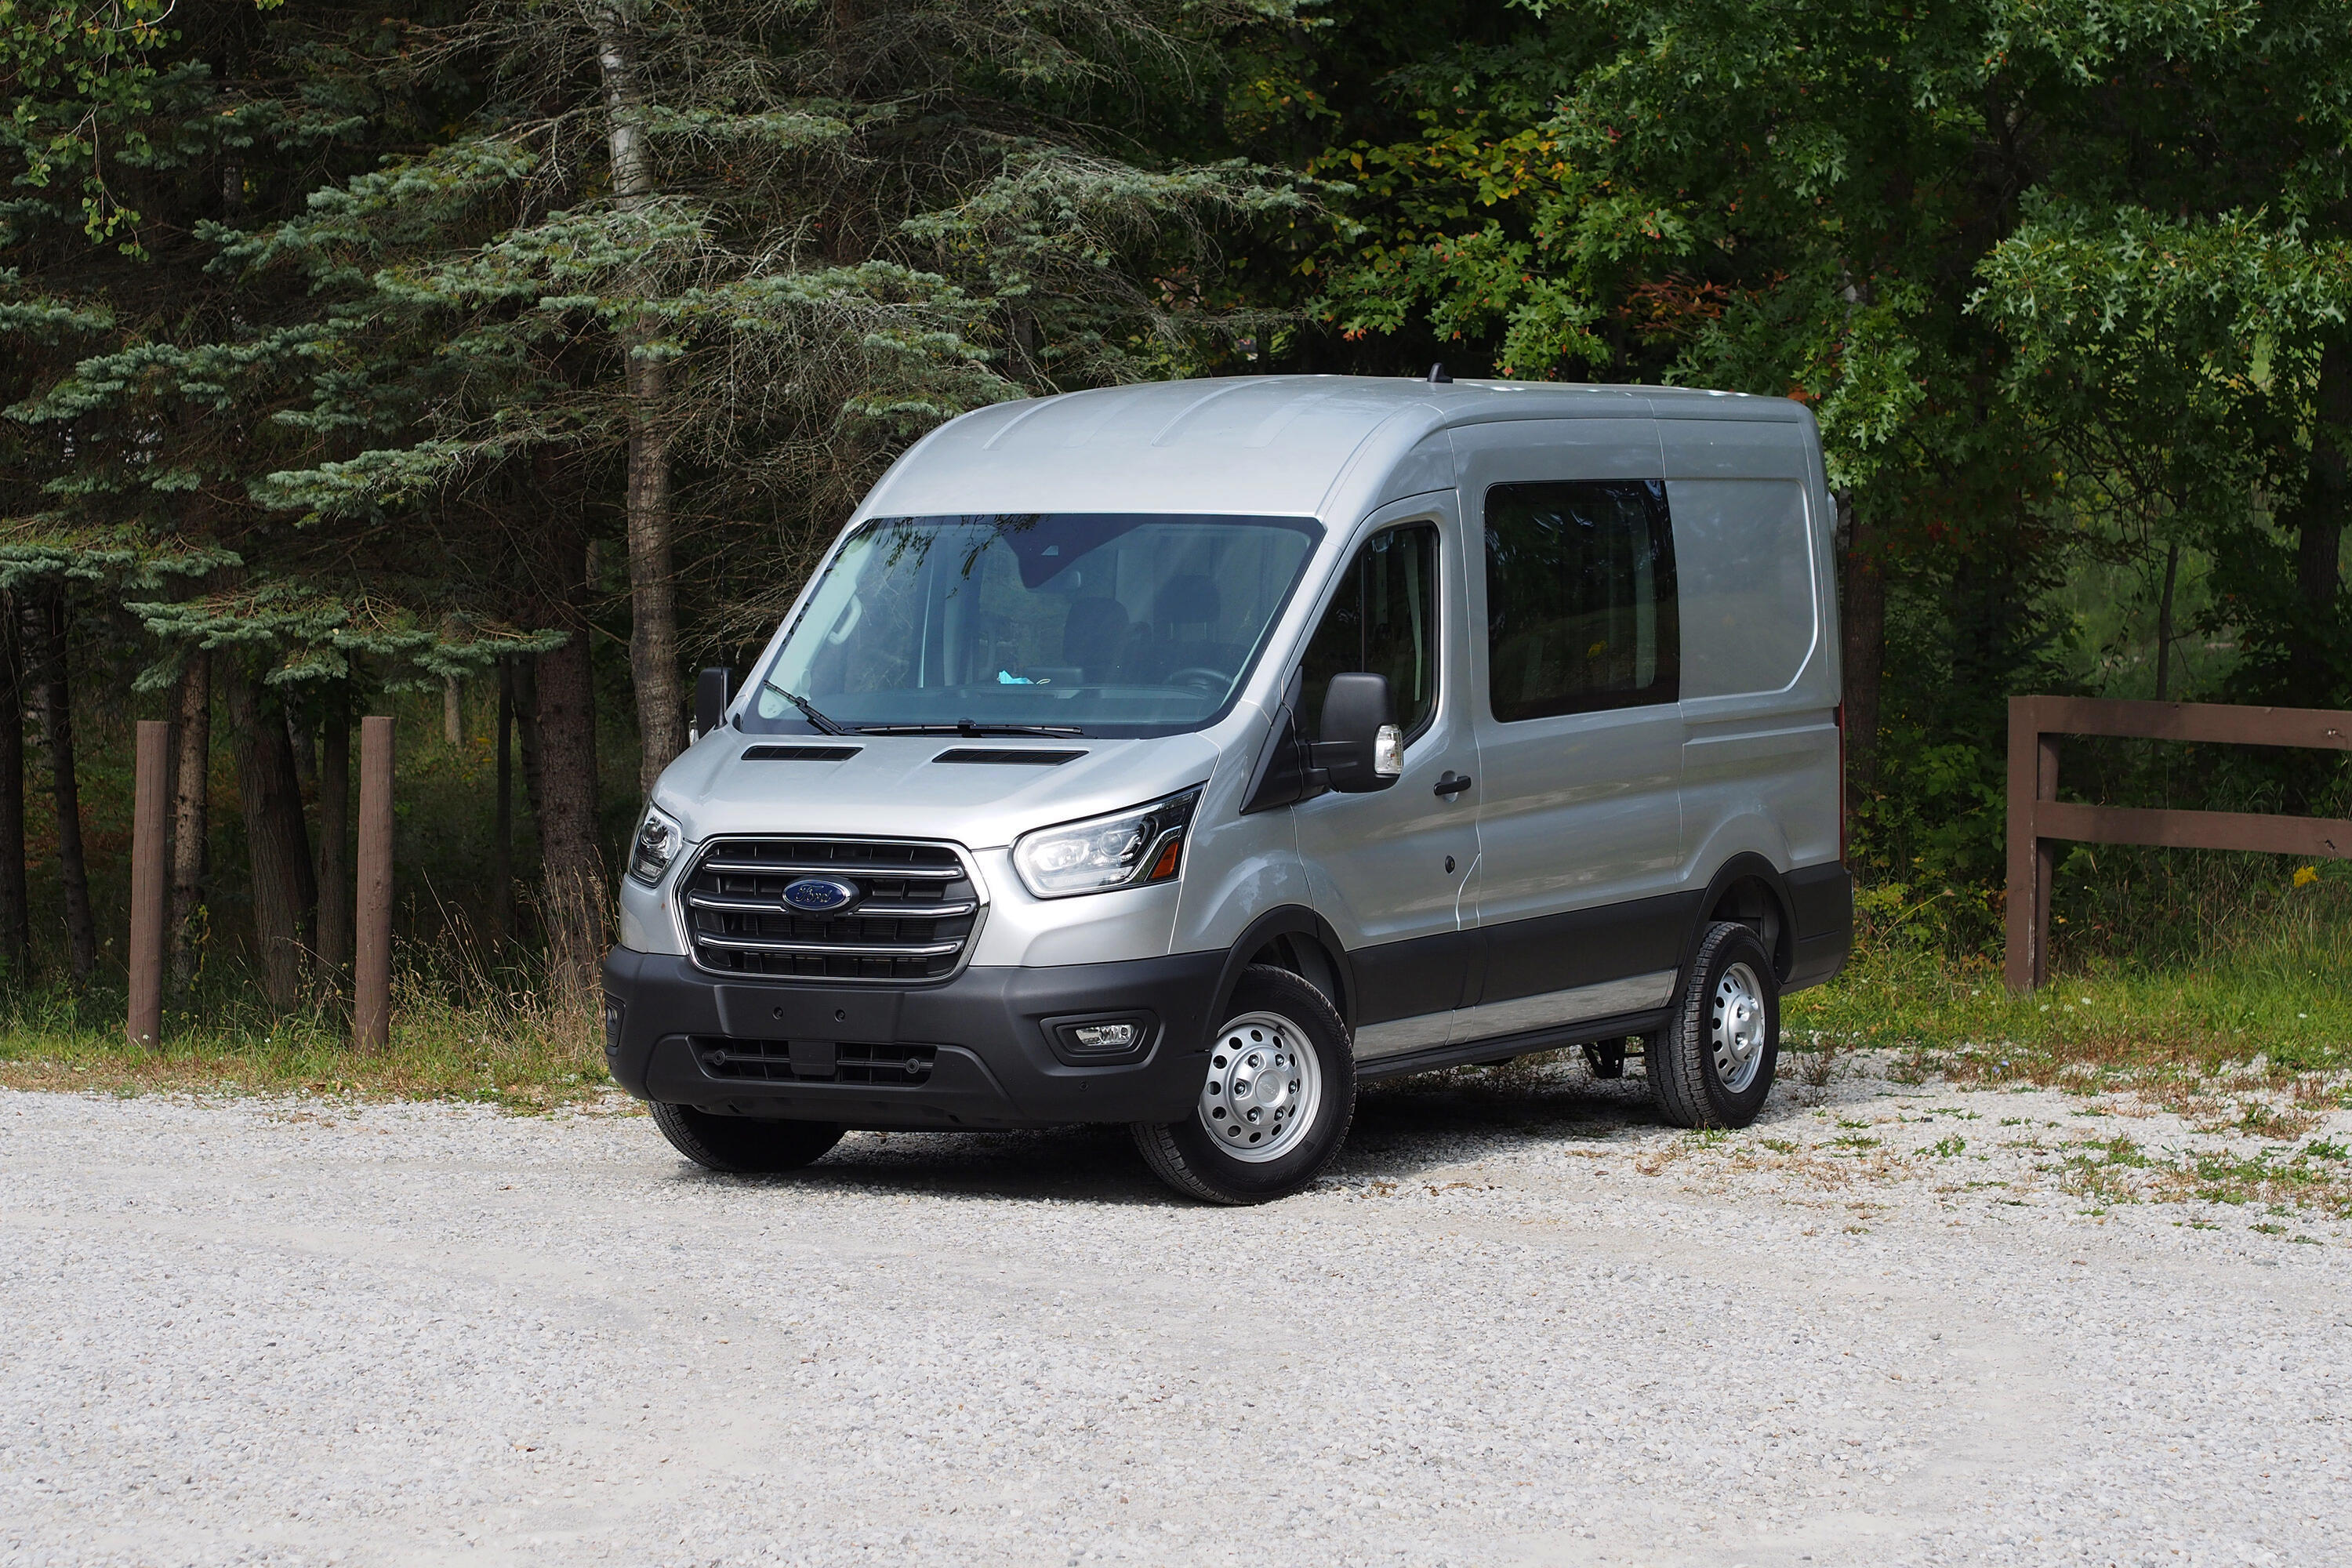 2020 Ford Transit review: A likable 